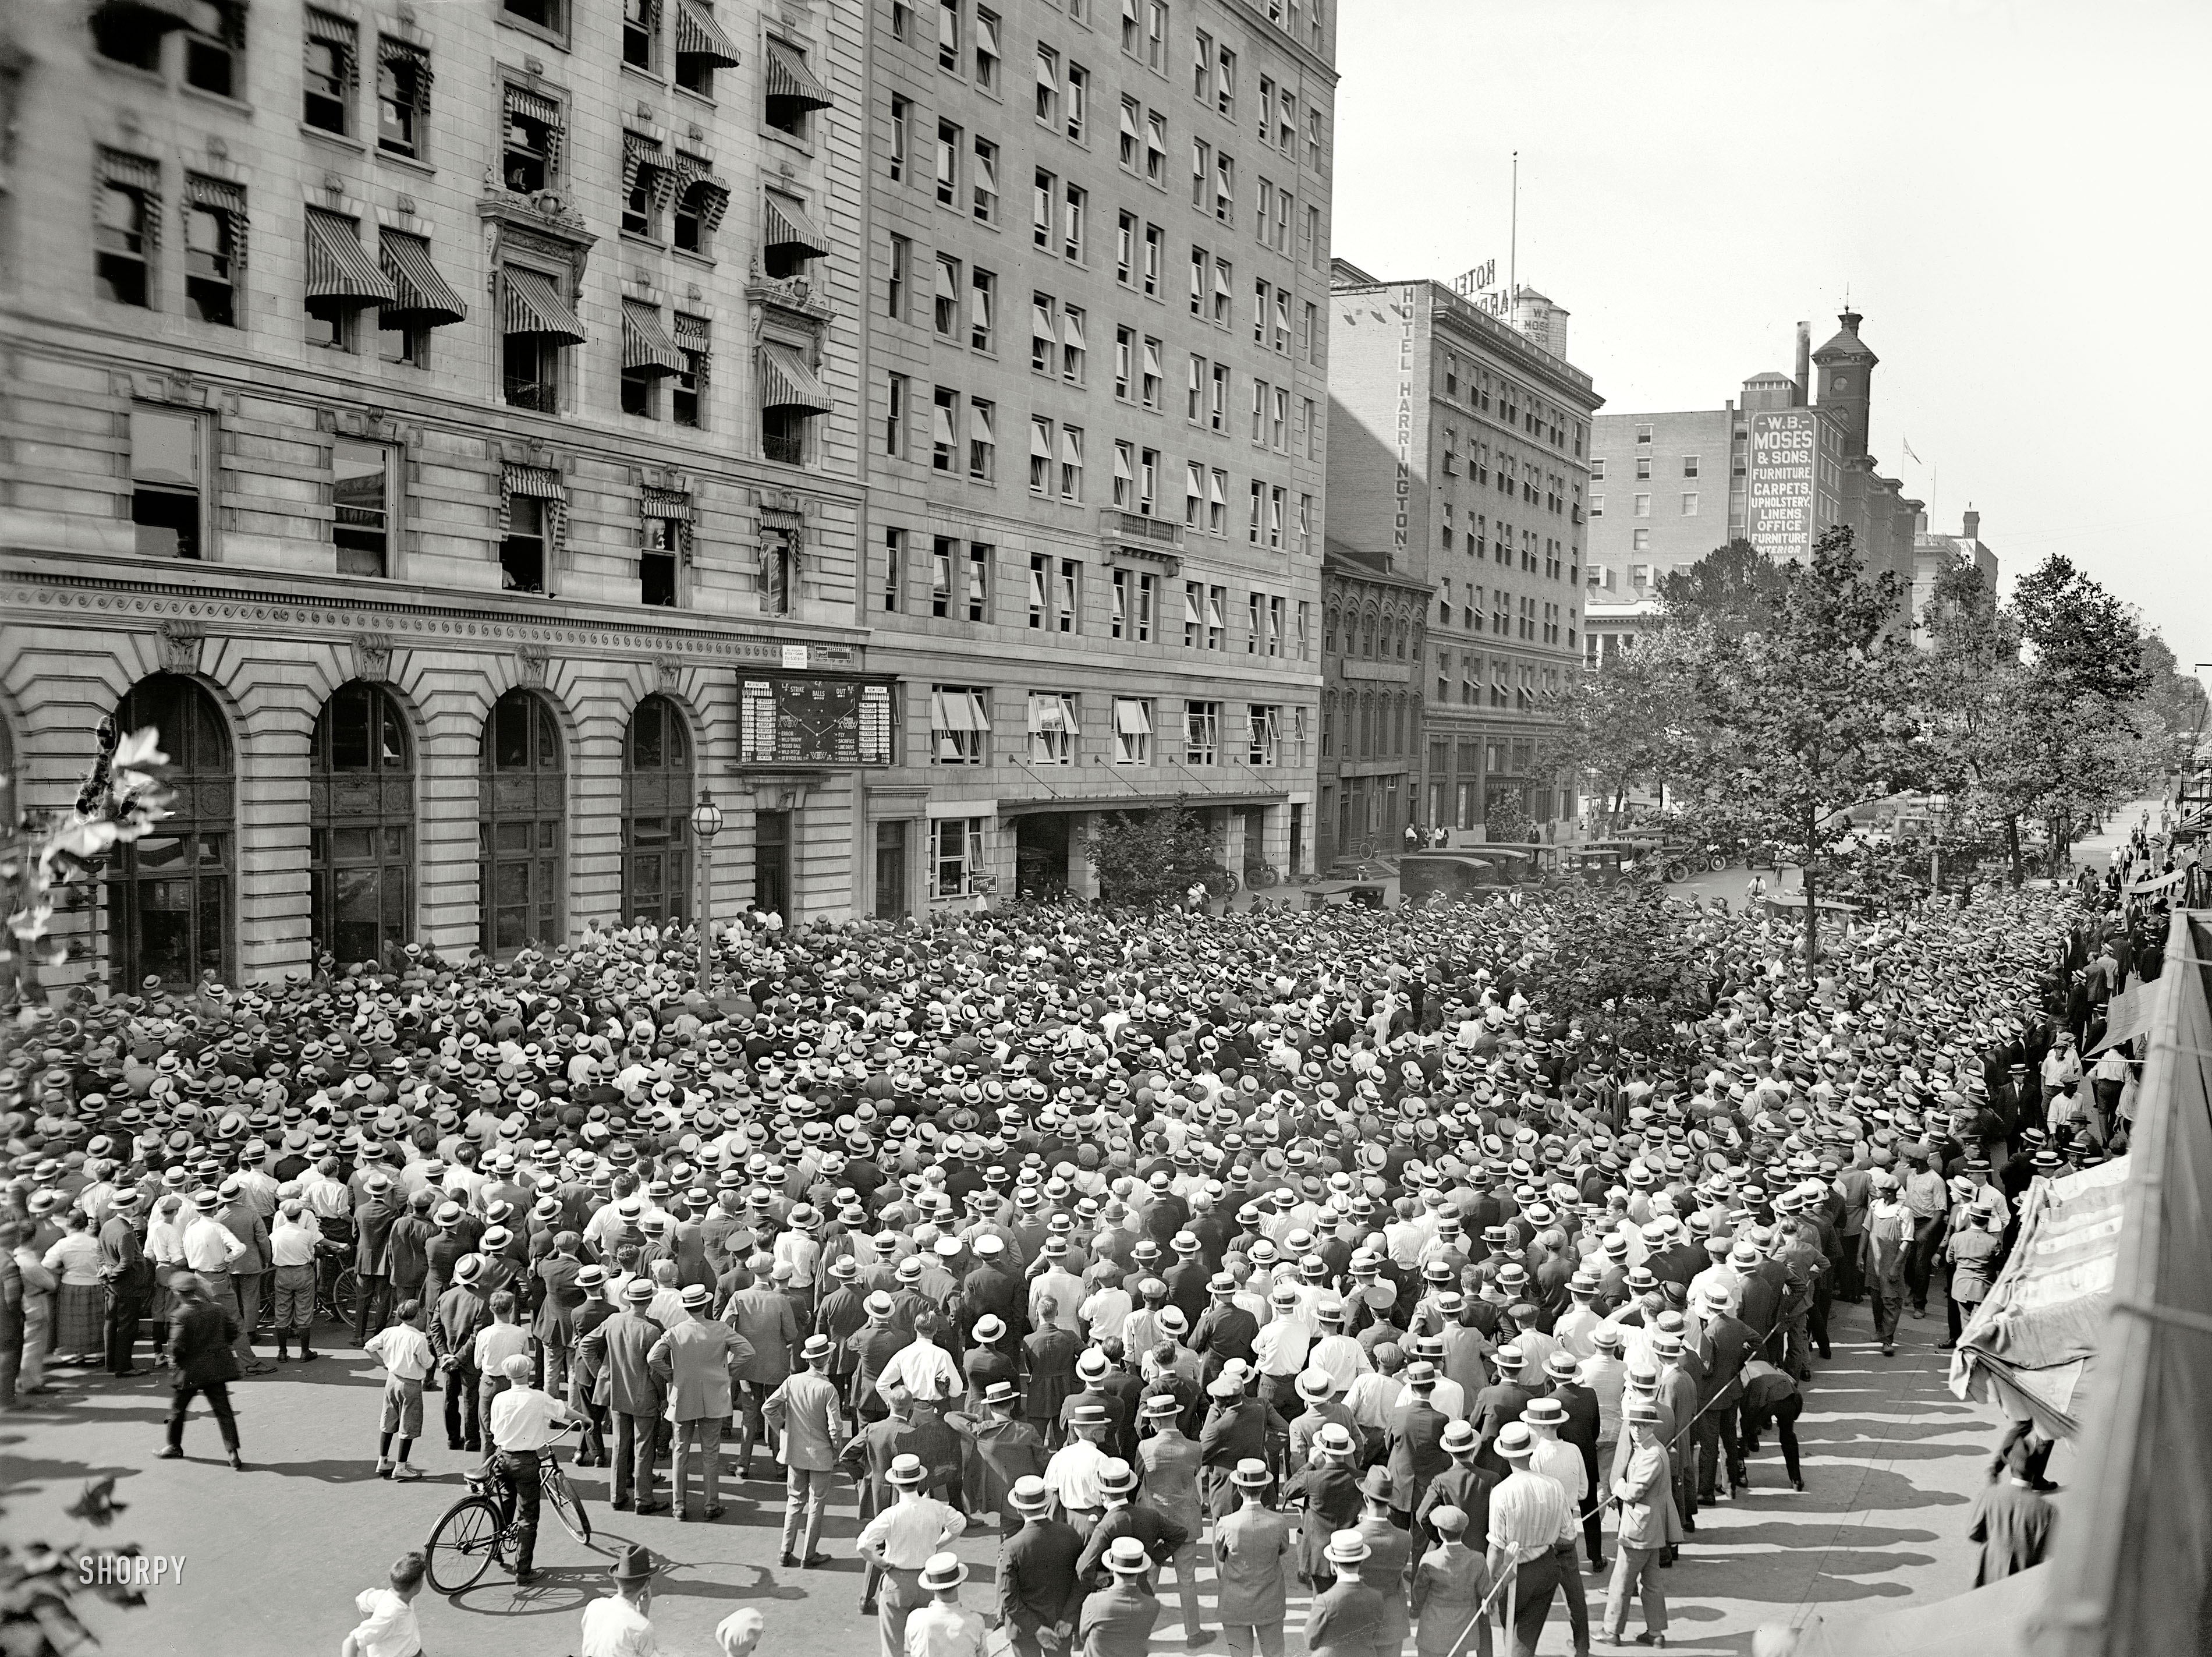 August 29, 1924. "Crowd at Washington Star scoreboard for A.L. Pennant game, Nationals-New York." The Nats beat the Yankees 5-1. A demonstration of the 1920s mania for baseball (and the straw boater), at just about the time radio was making mechanical scoreboards obsolete. National Photo Co. View full size.